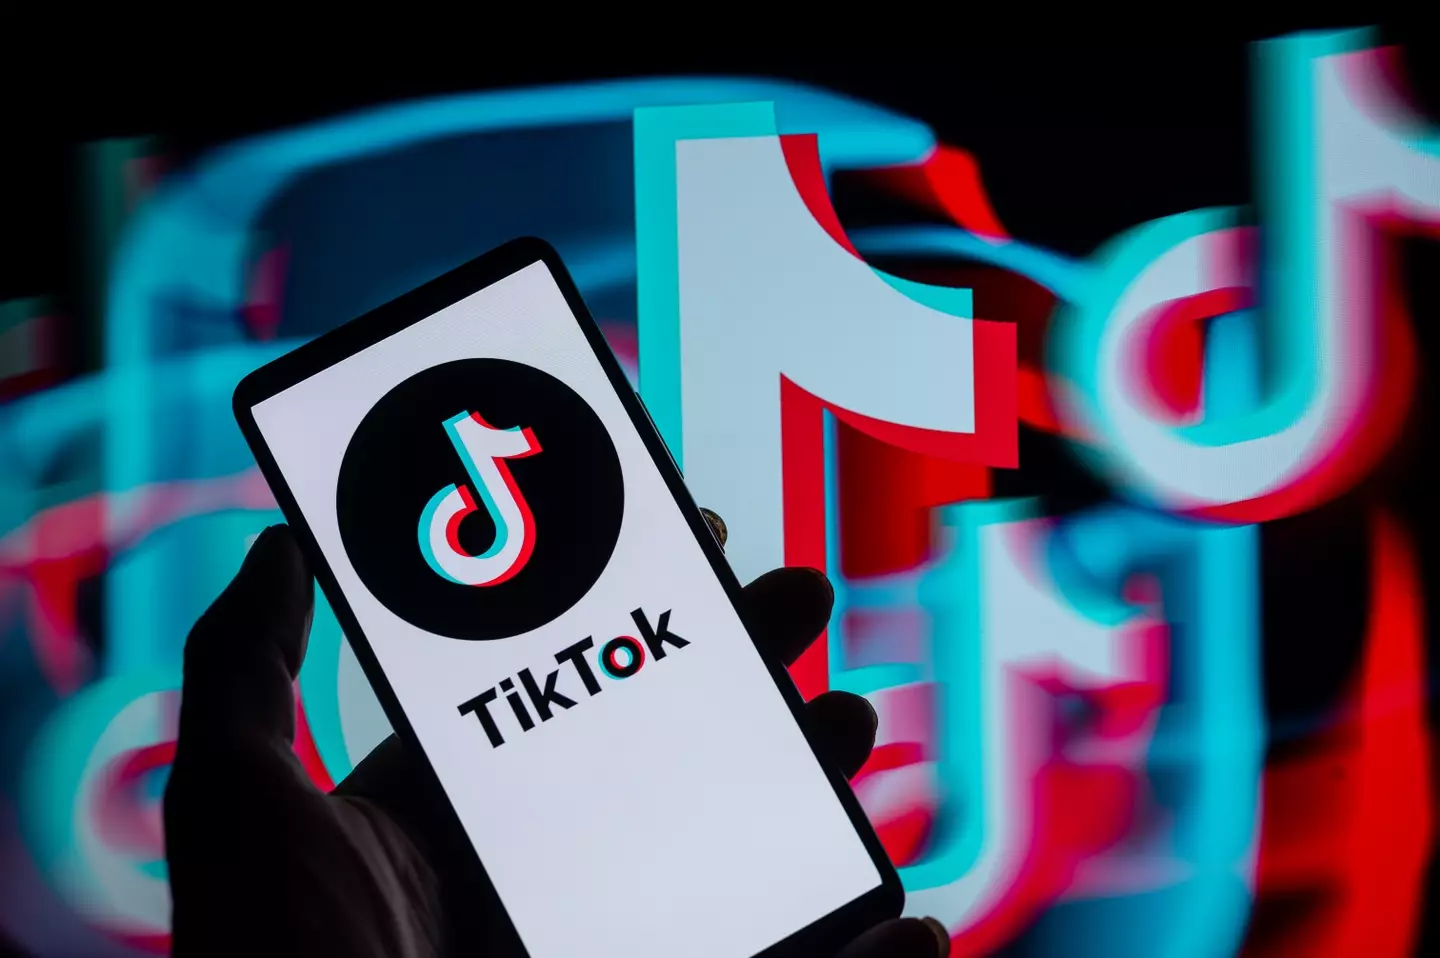 The kind of content you see on TikTok could be changing.